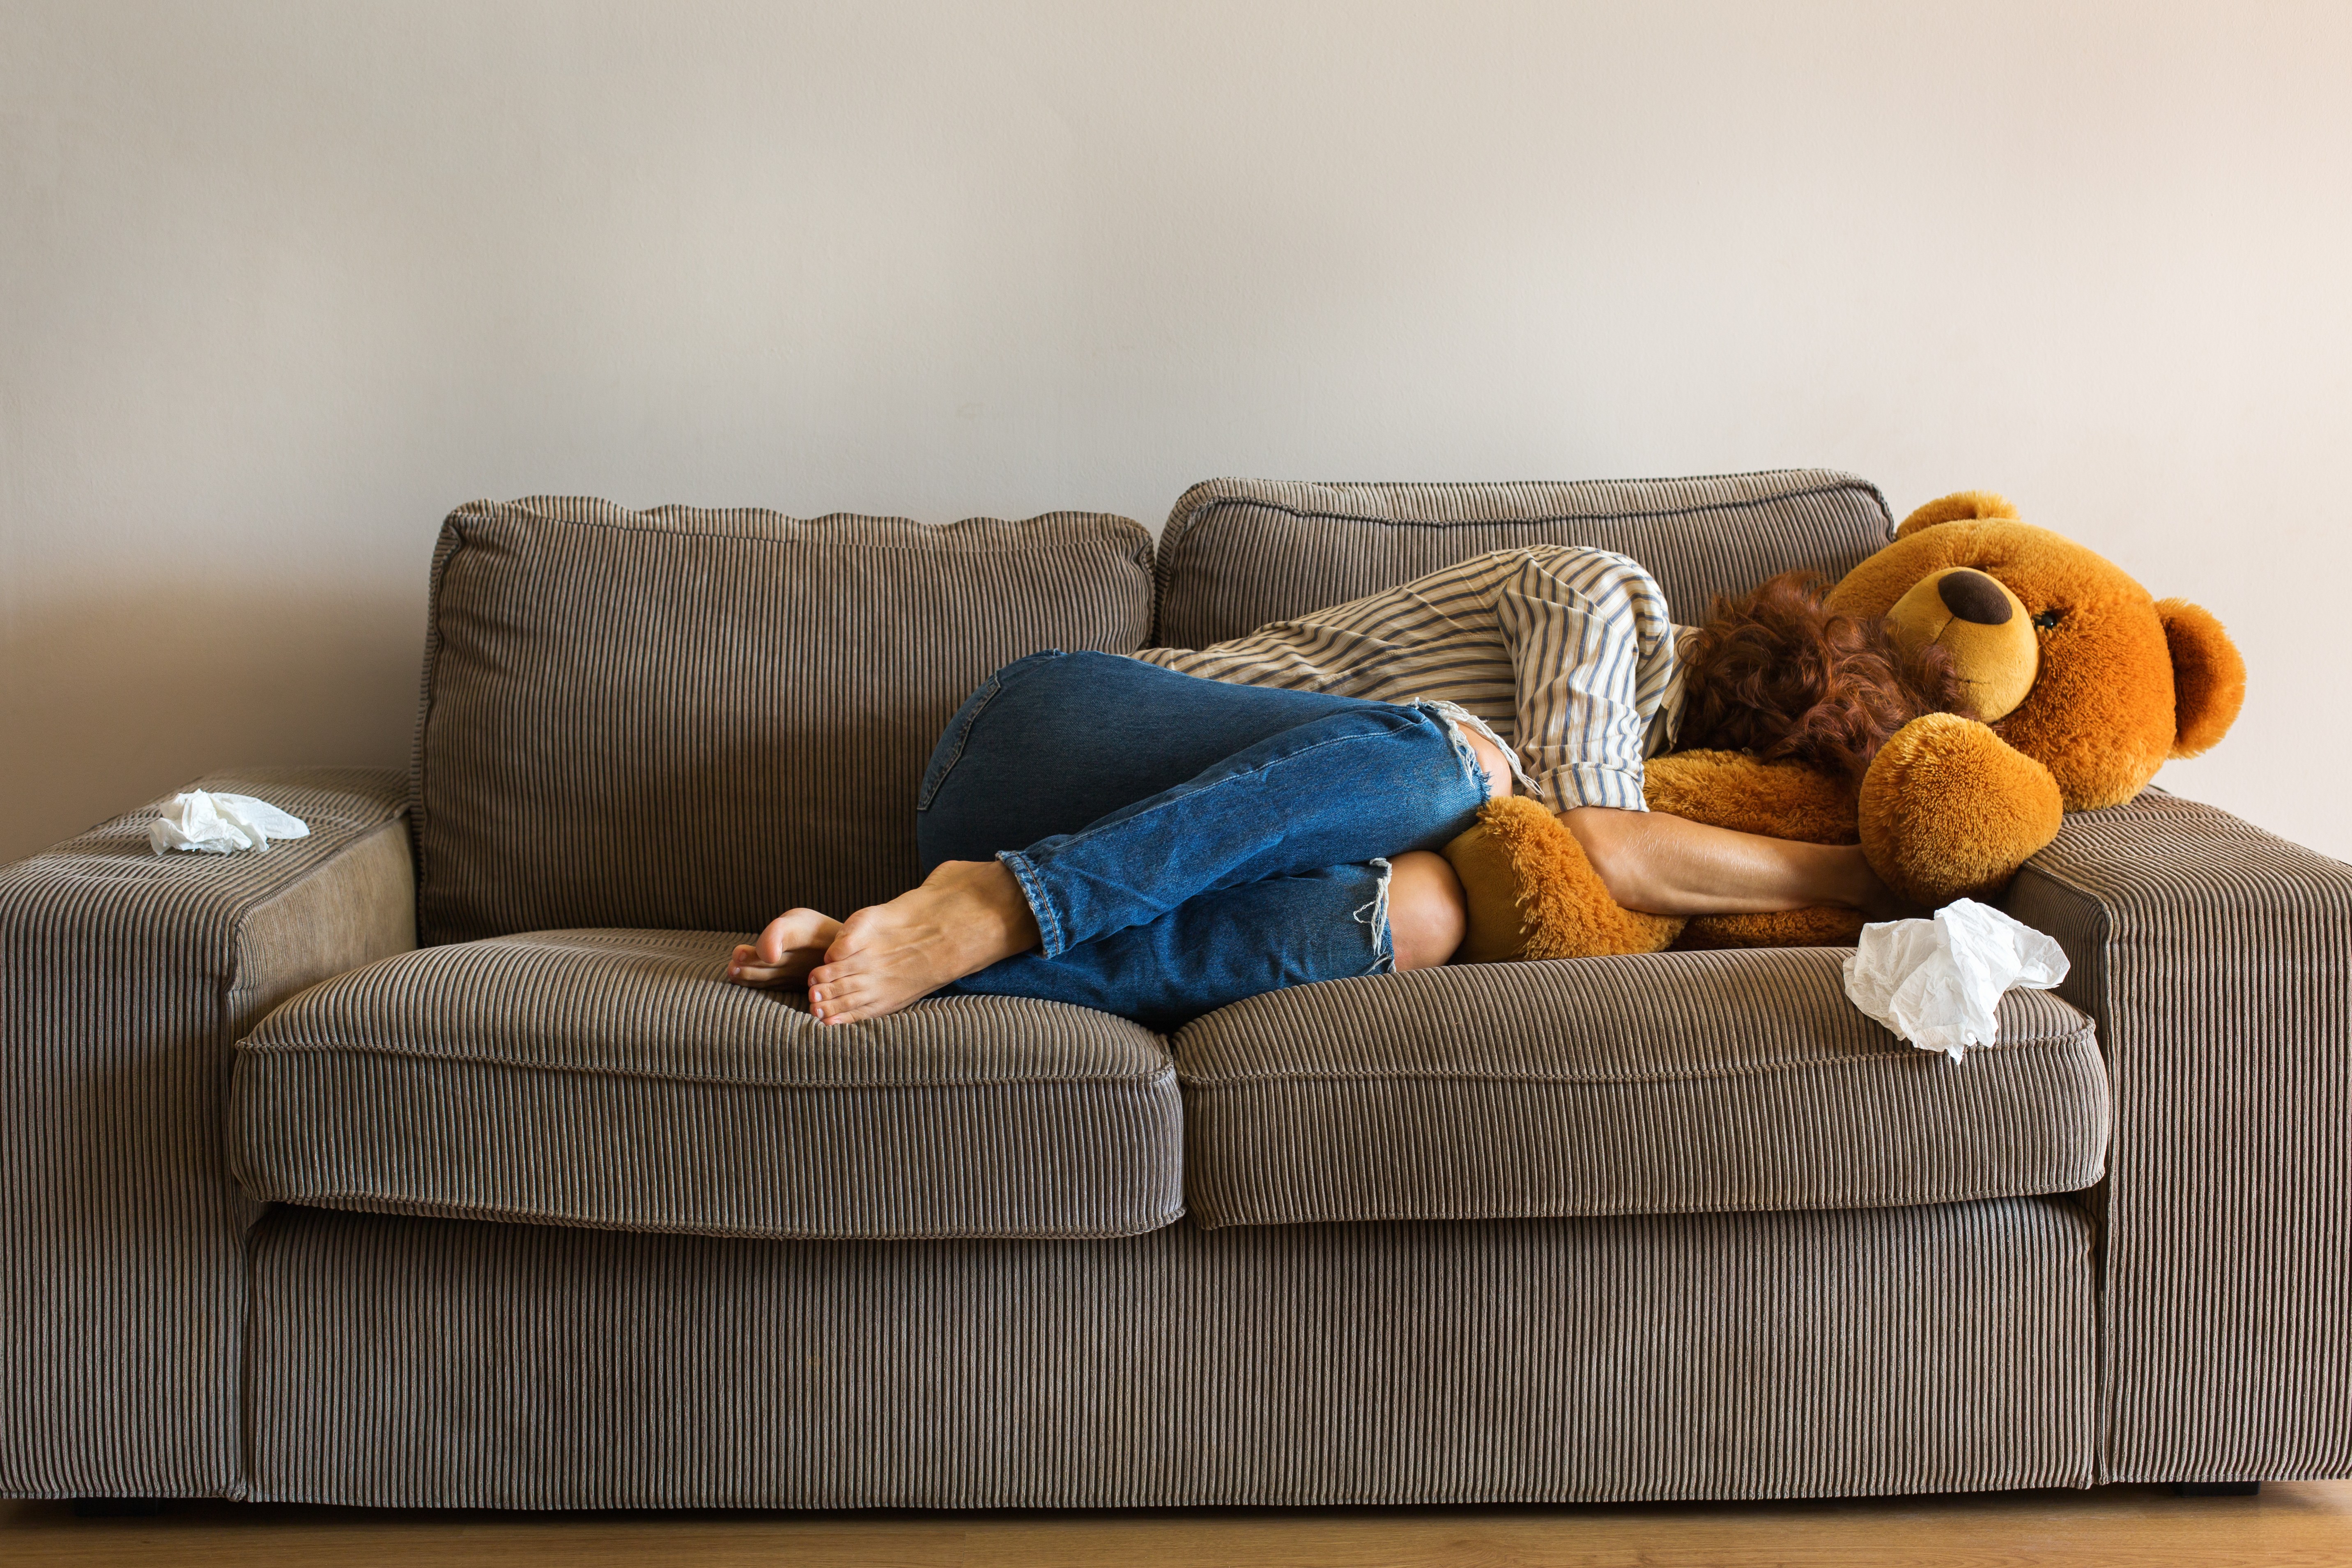 A depressed young woman lies on the couch and cries while hugging a teddy bear | Source: Shutterstock